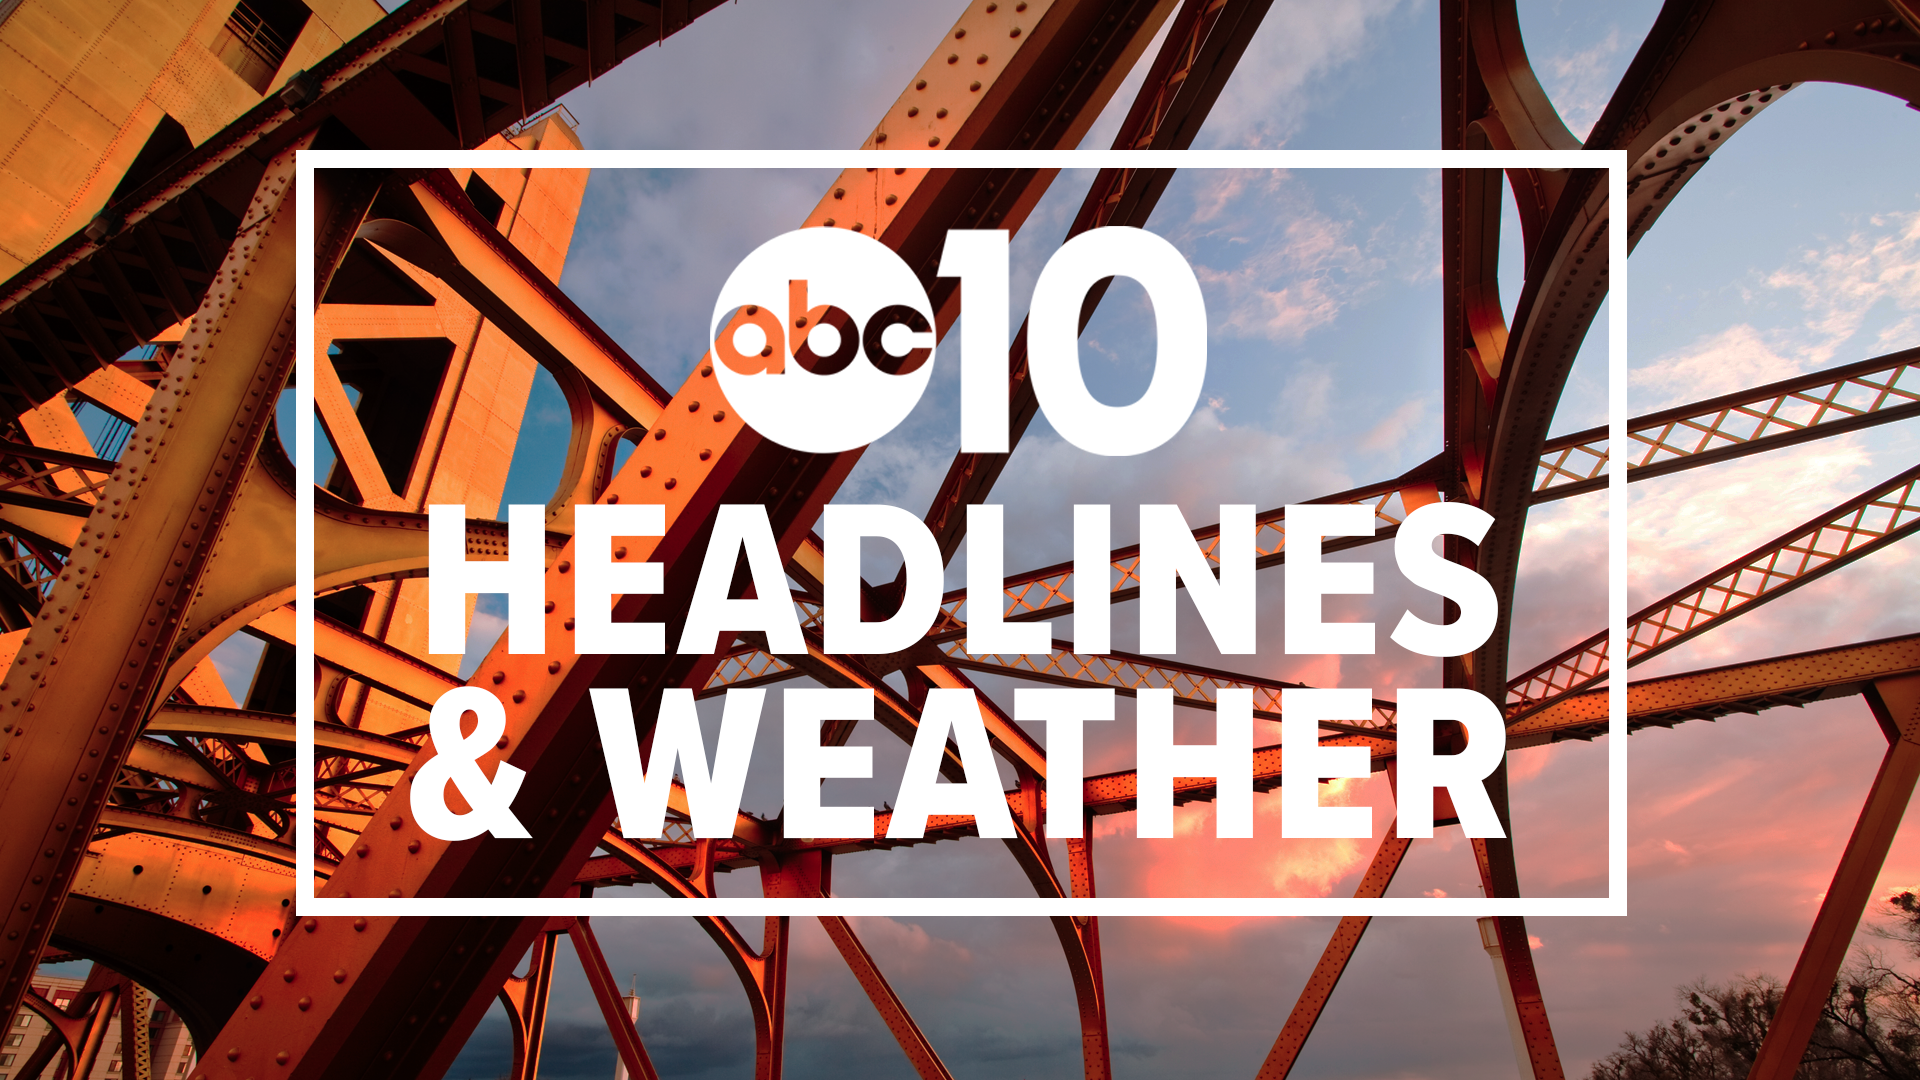 Evening Headlines: September 06, 2019 | Catch in-depth reporting on #LateNewsTonight at 11 p.m. | The latest Sacramento news is always at www.abc10.com